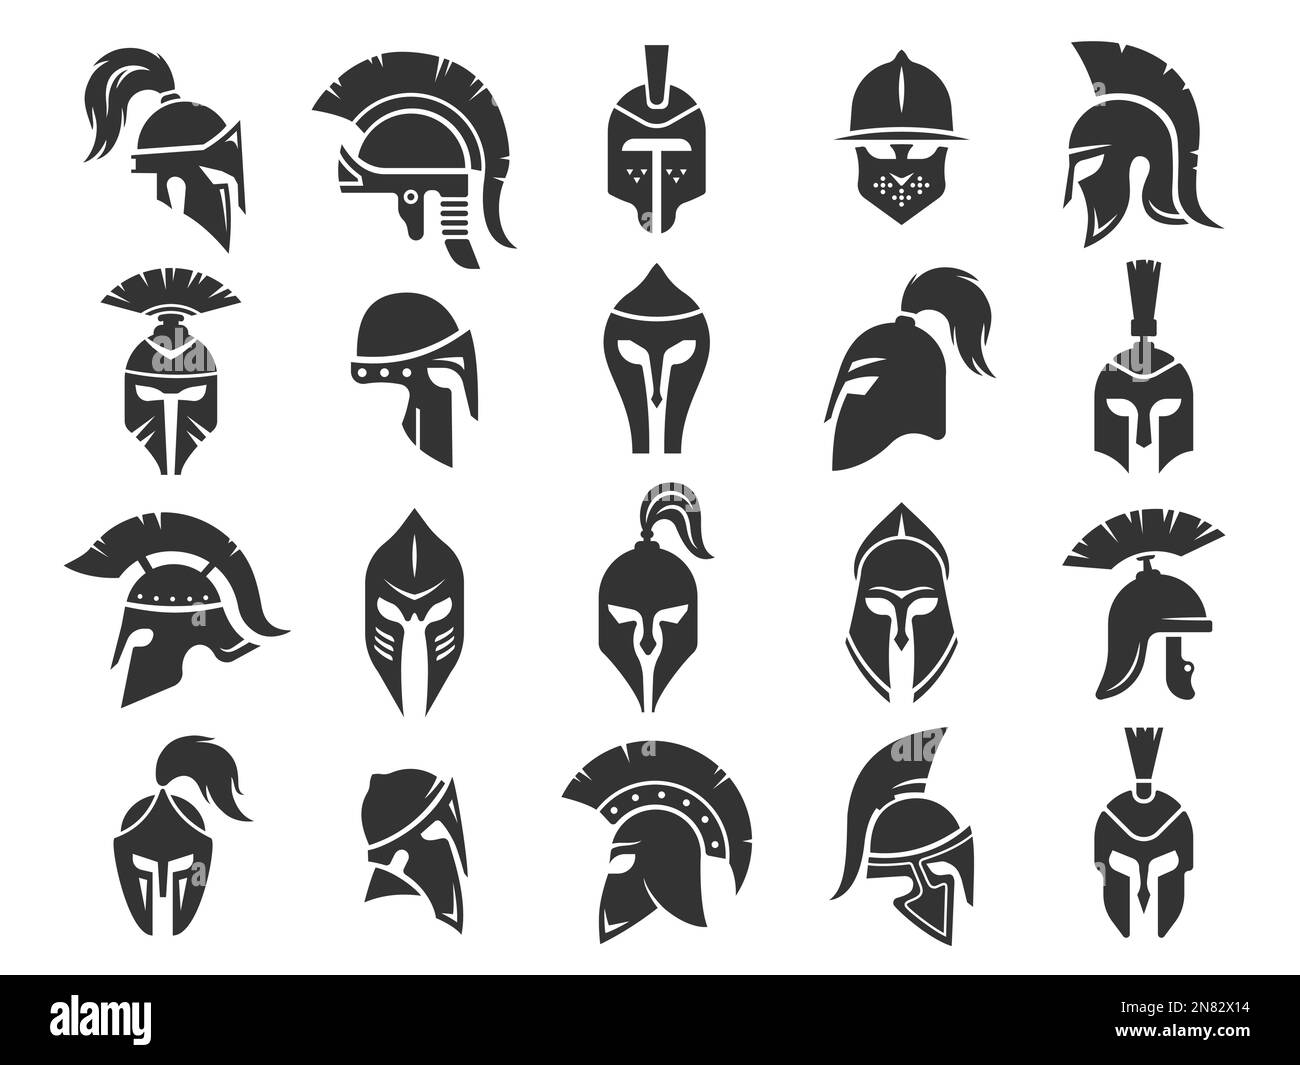 Spartan black helmets. Ancient roman gladiator headgear protection, monochrome silhouettes of medieval classical greek soldier war equipment. Vector Stock Vector